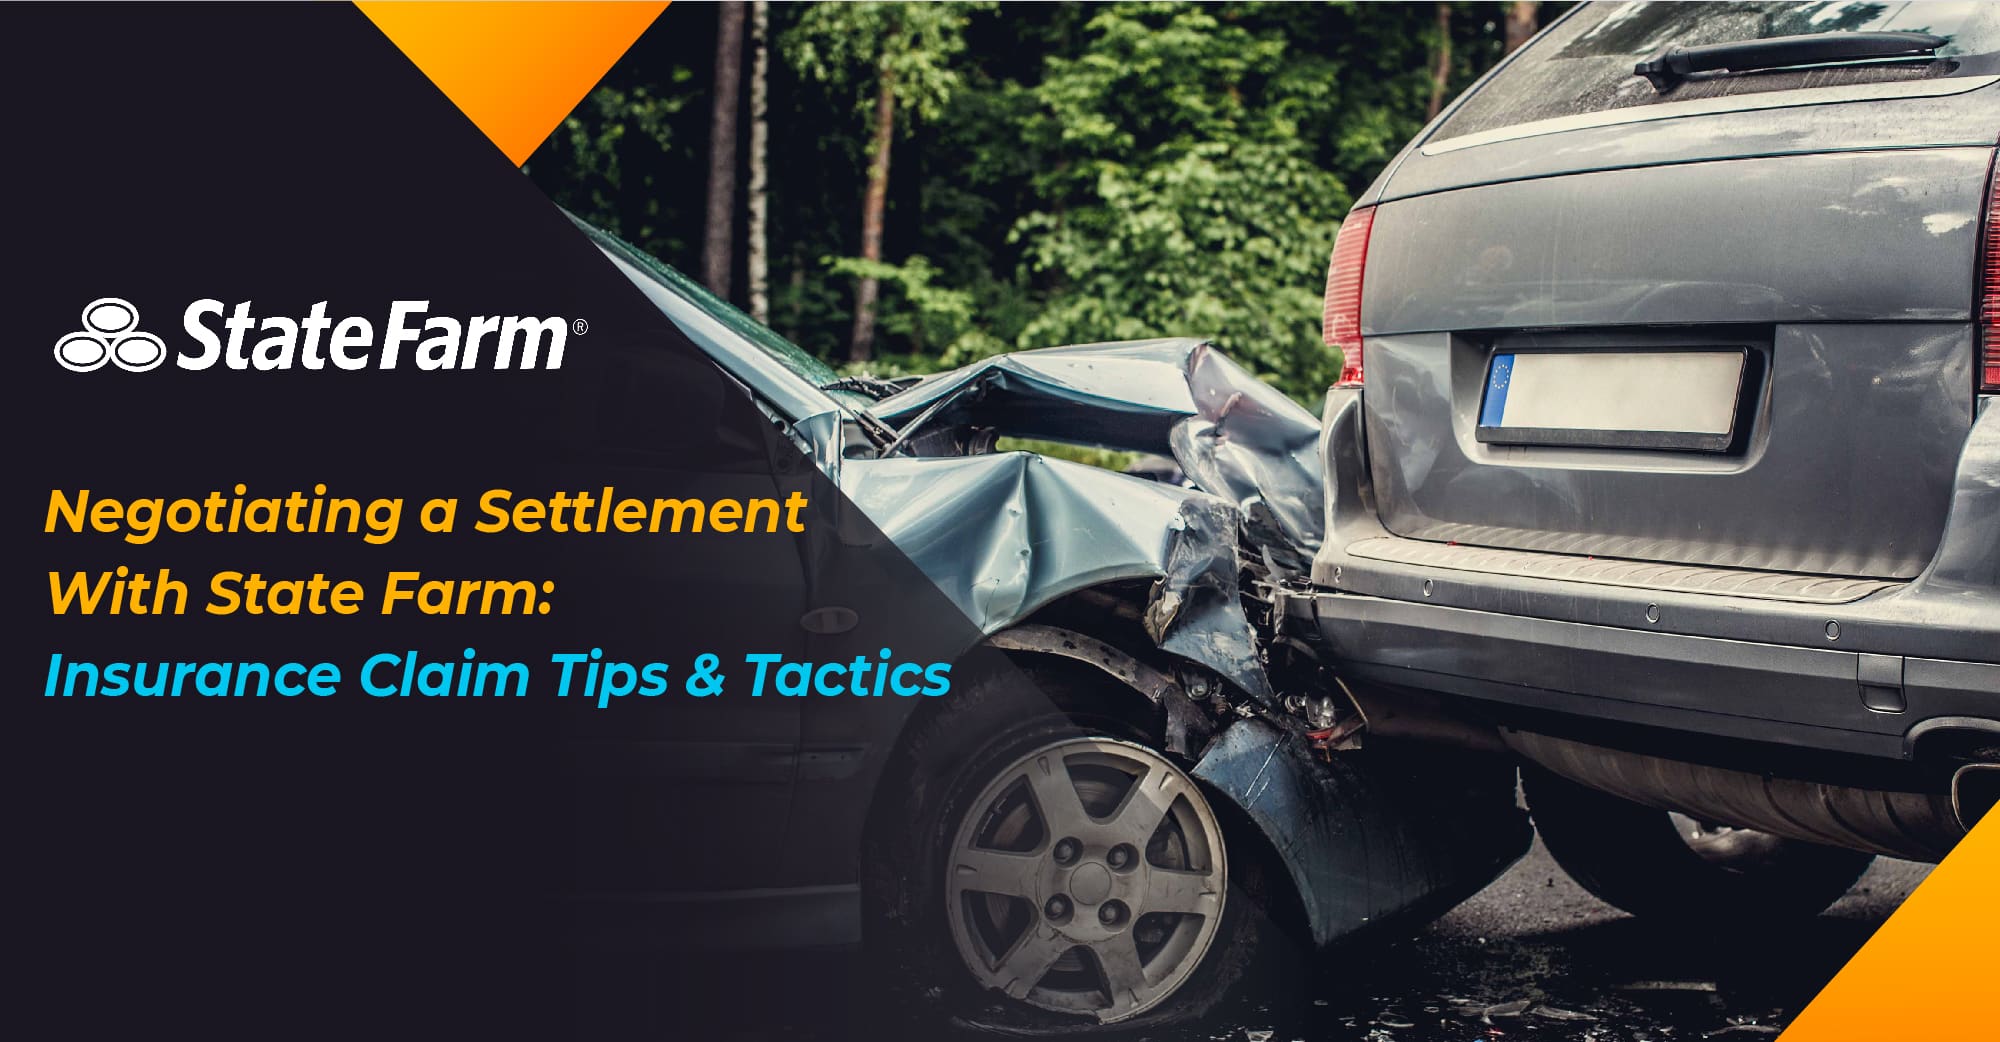 Car Insurance: Insurance company can reject claim for stolen car if